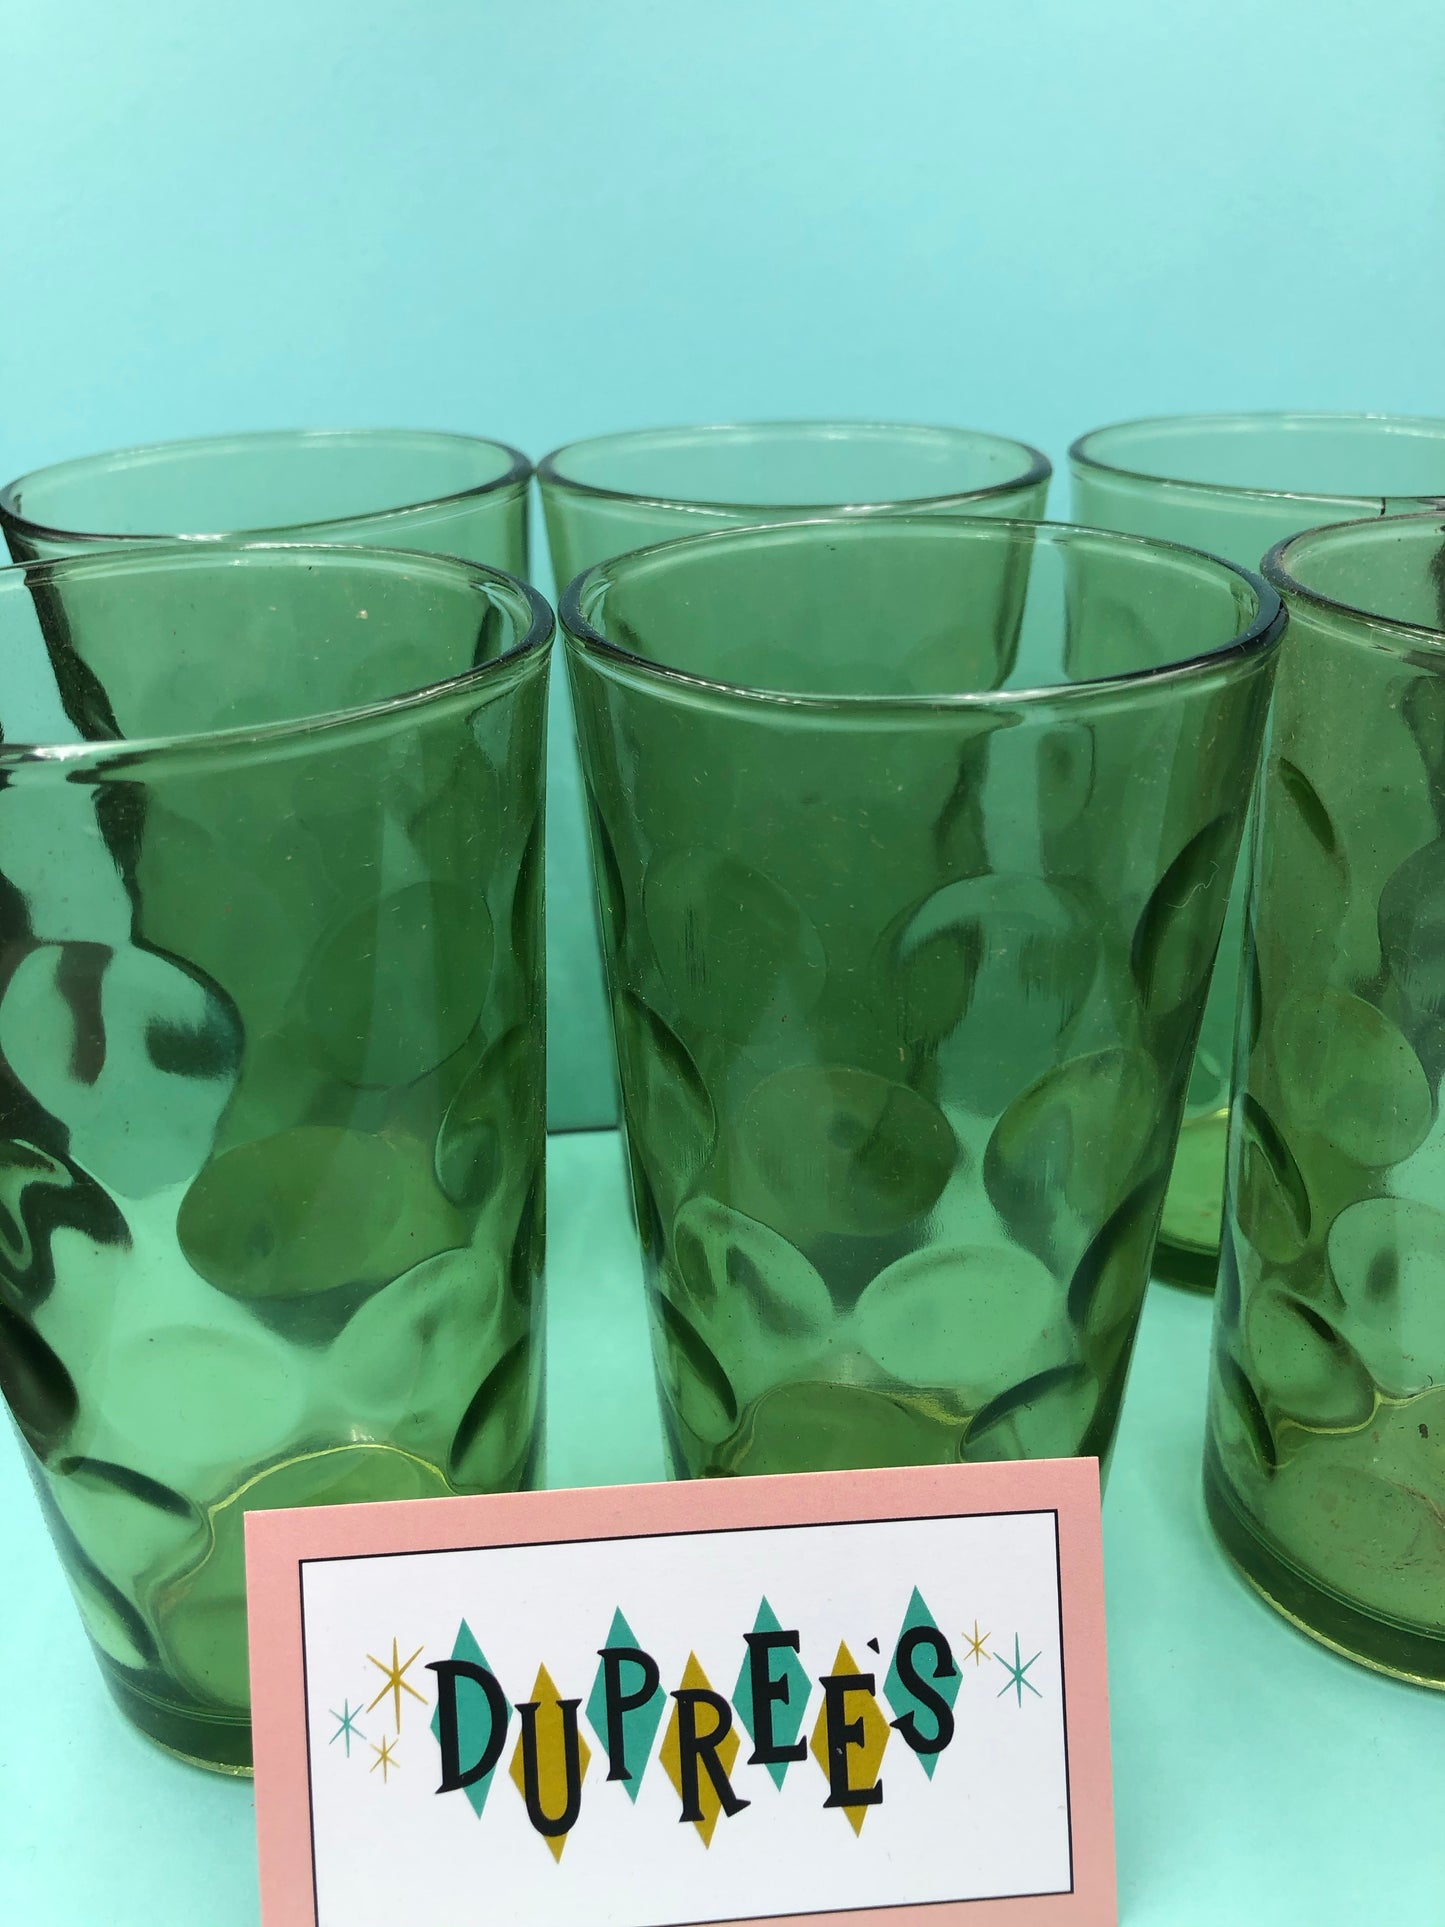 7 piece beverage set - glass pitcher and 6 iced tea glasses